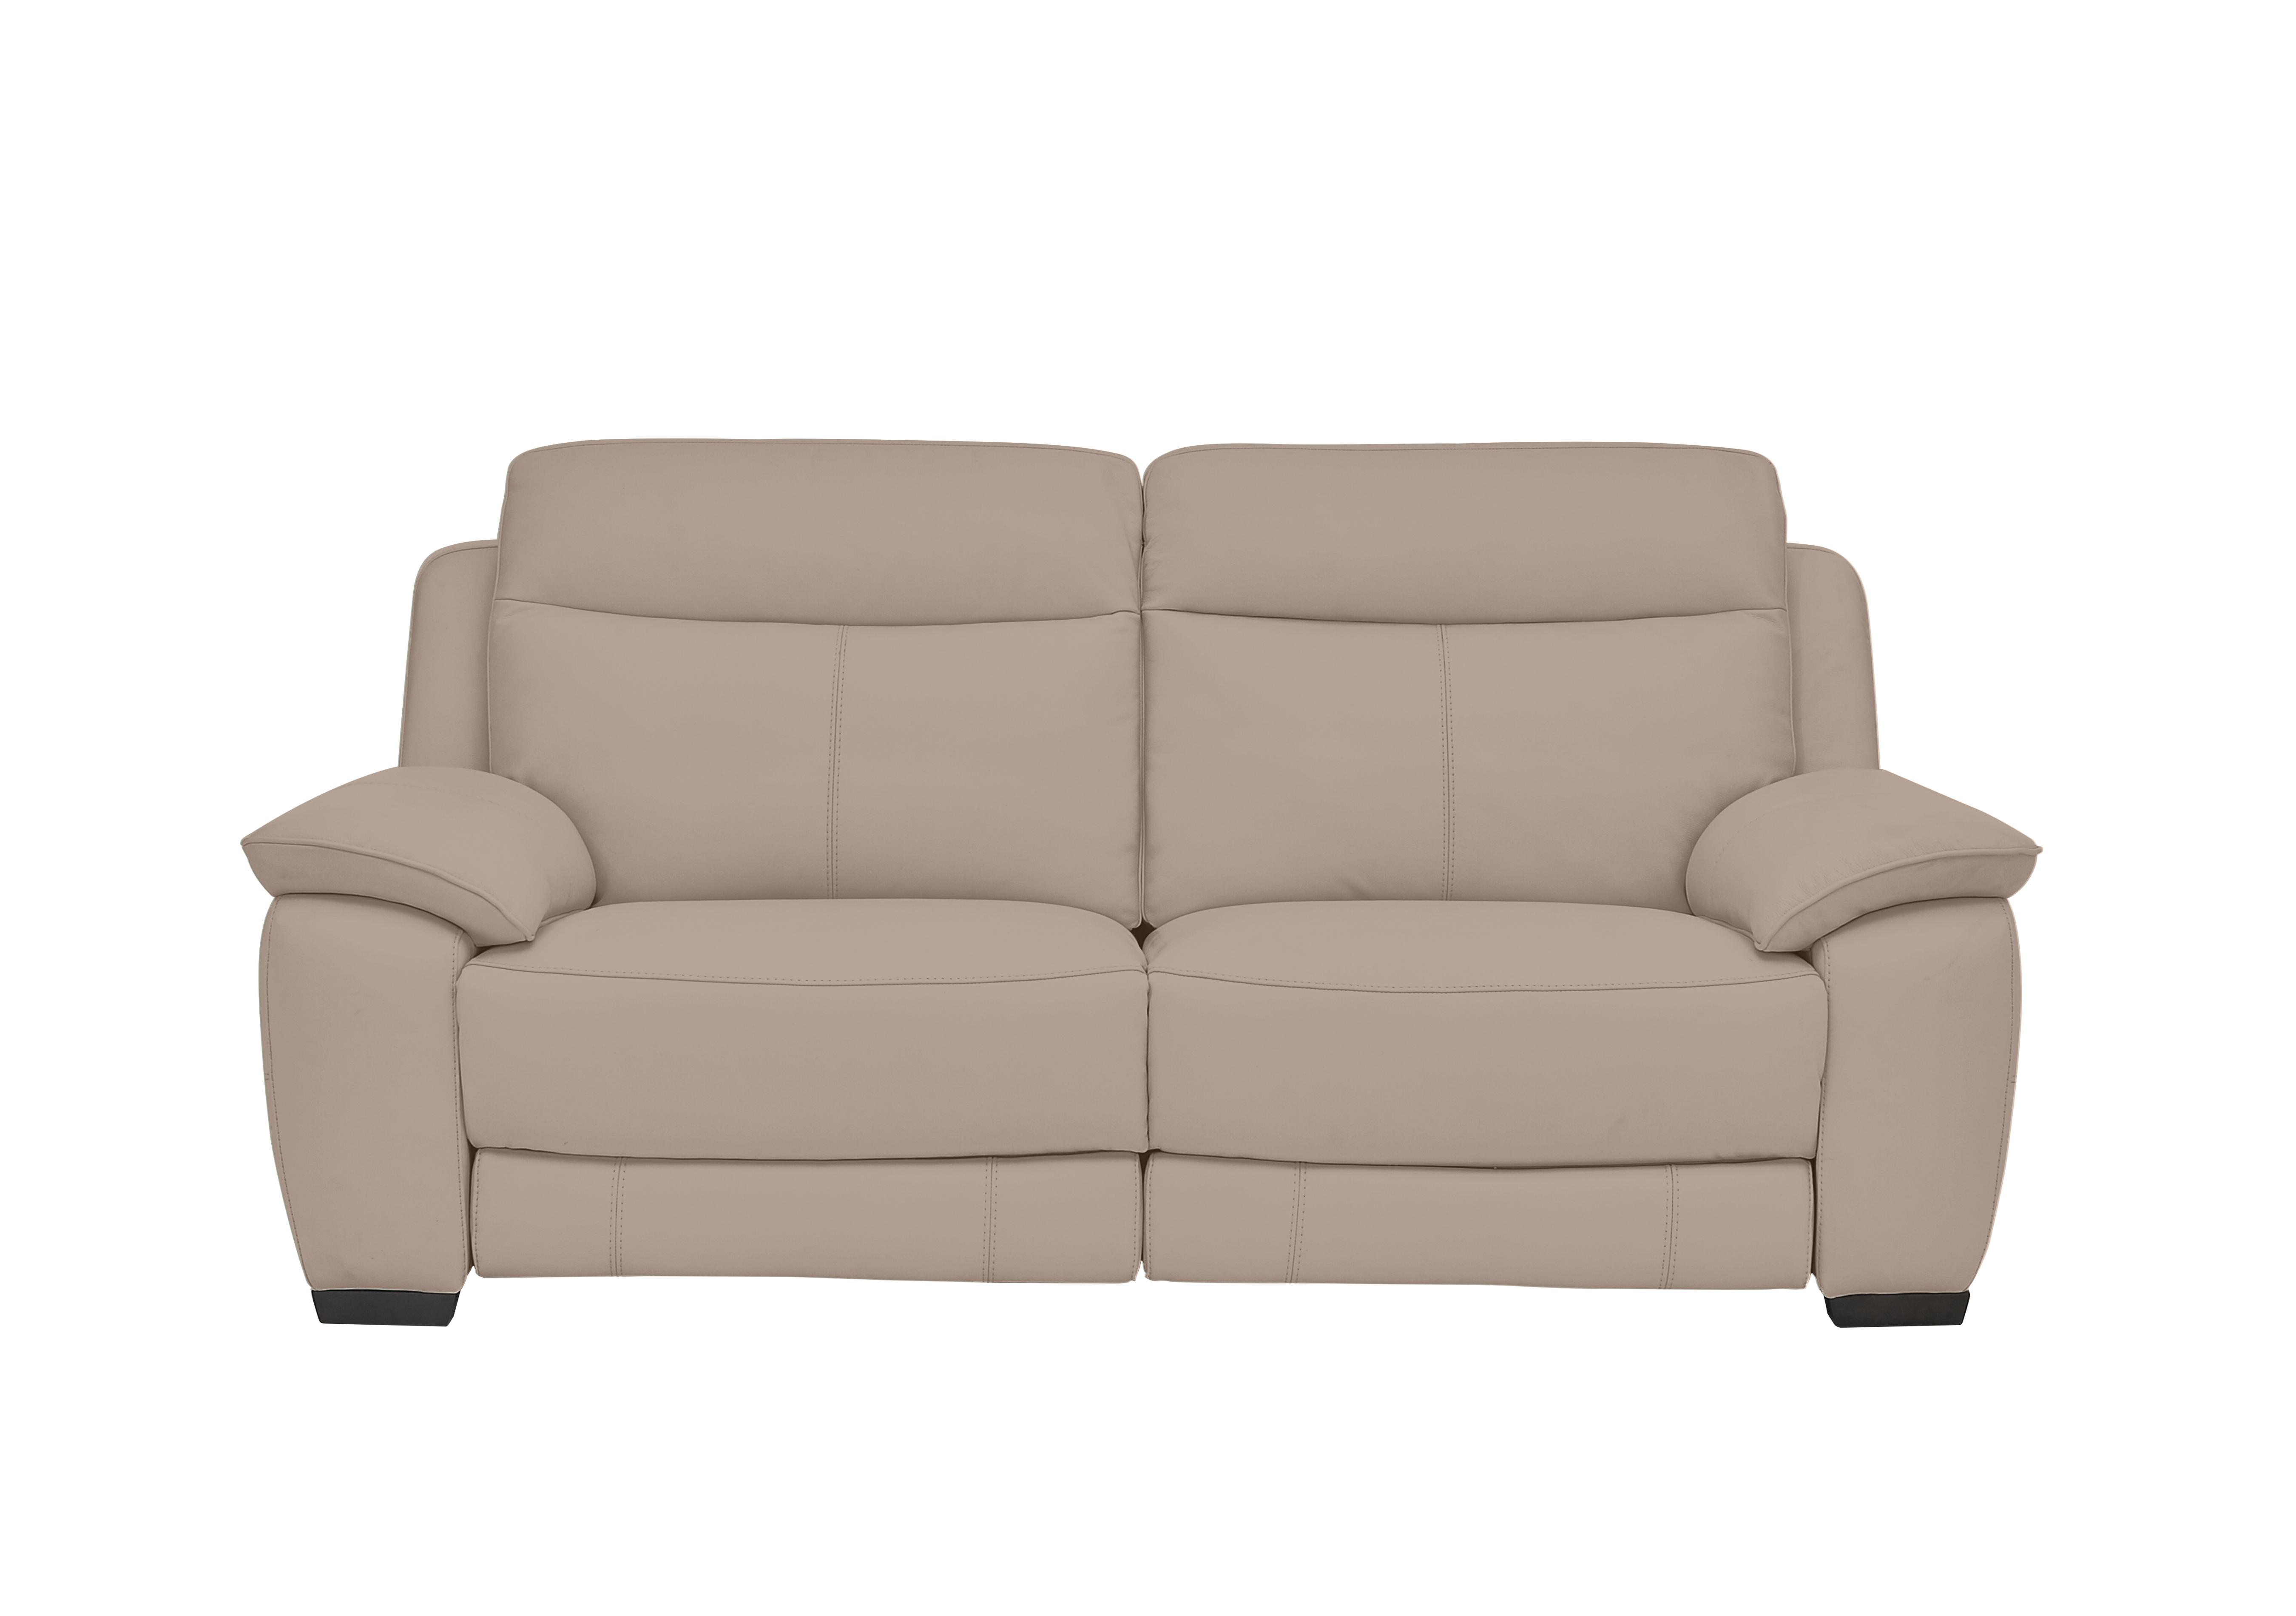 Starlight Express 3 Seater Leather Sofa in Bv-039c Pebble on Furniture Village